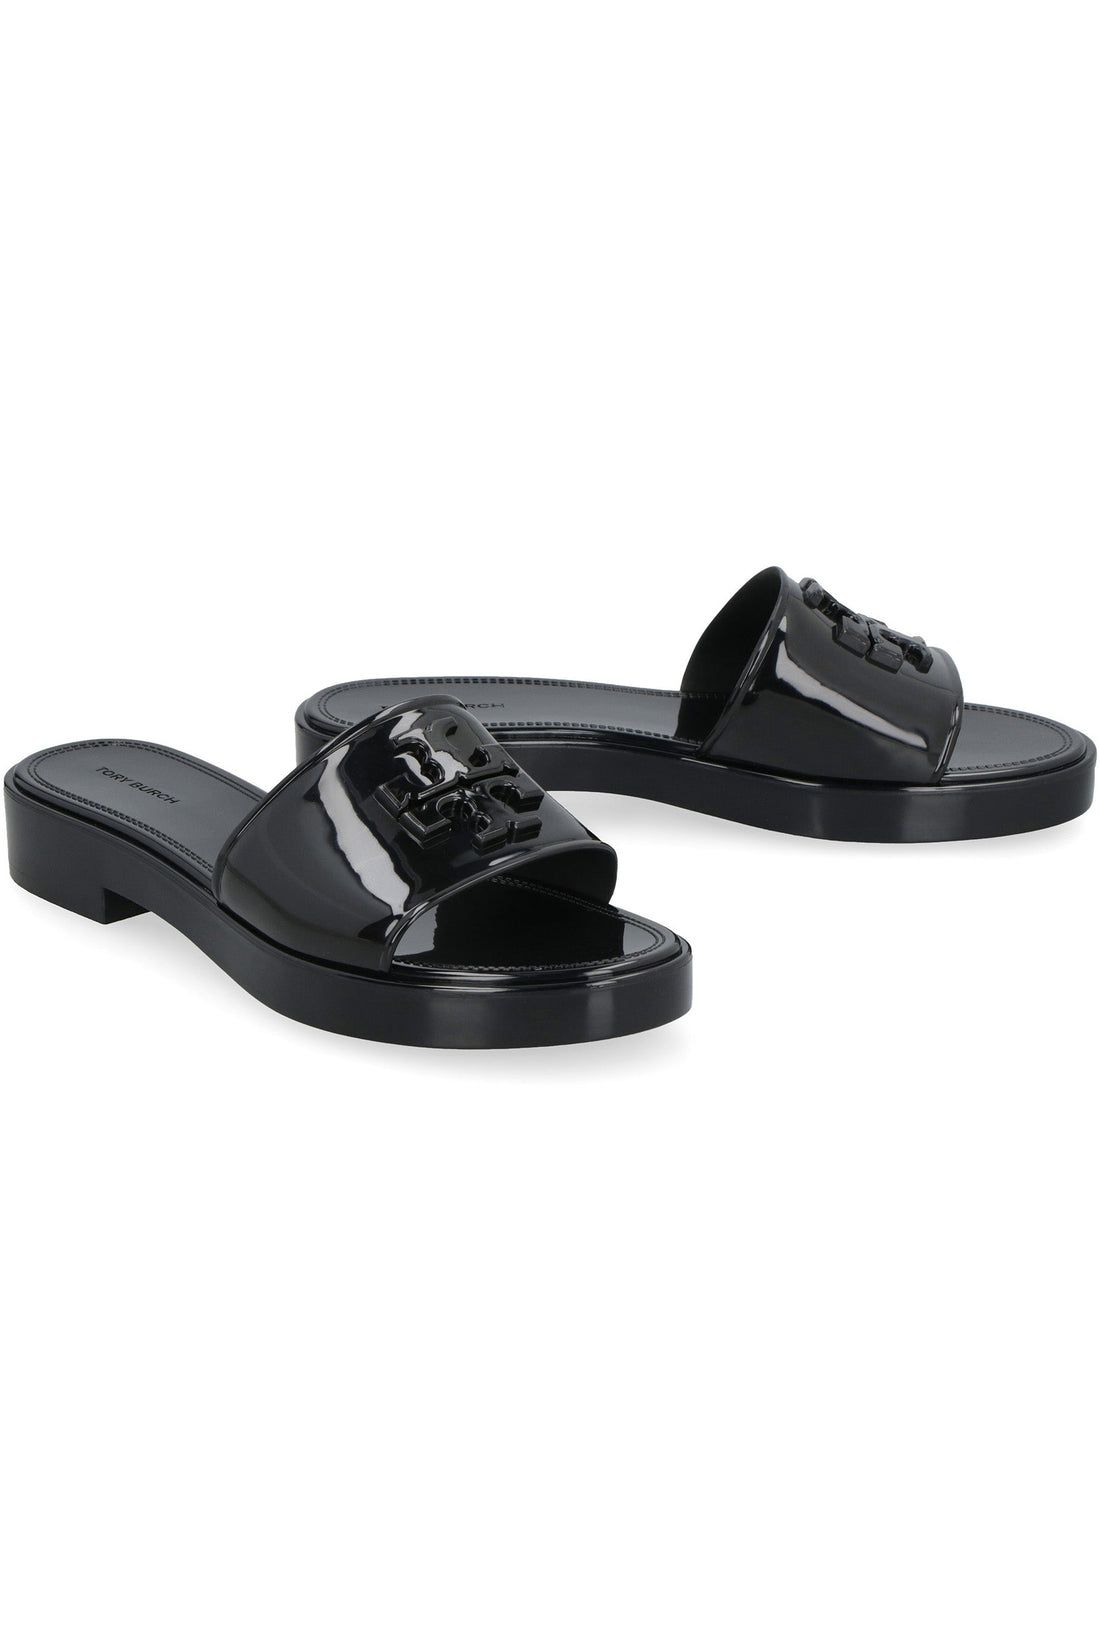 Tory Burch-OUTLET-SALE-Eleanor Jelly rubber slides-ARCHIVIST